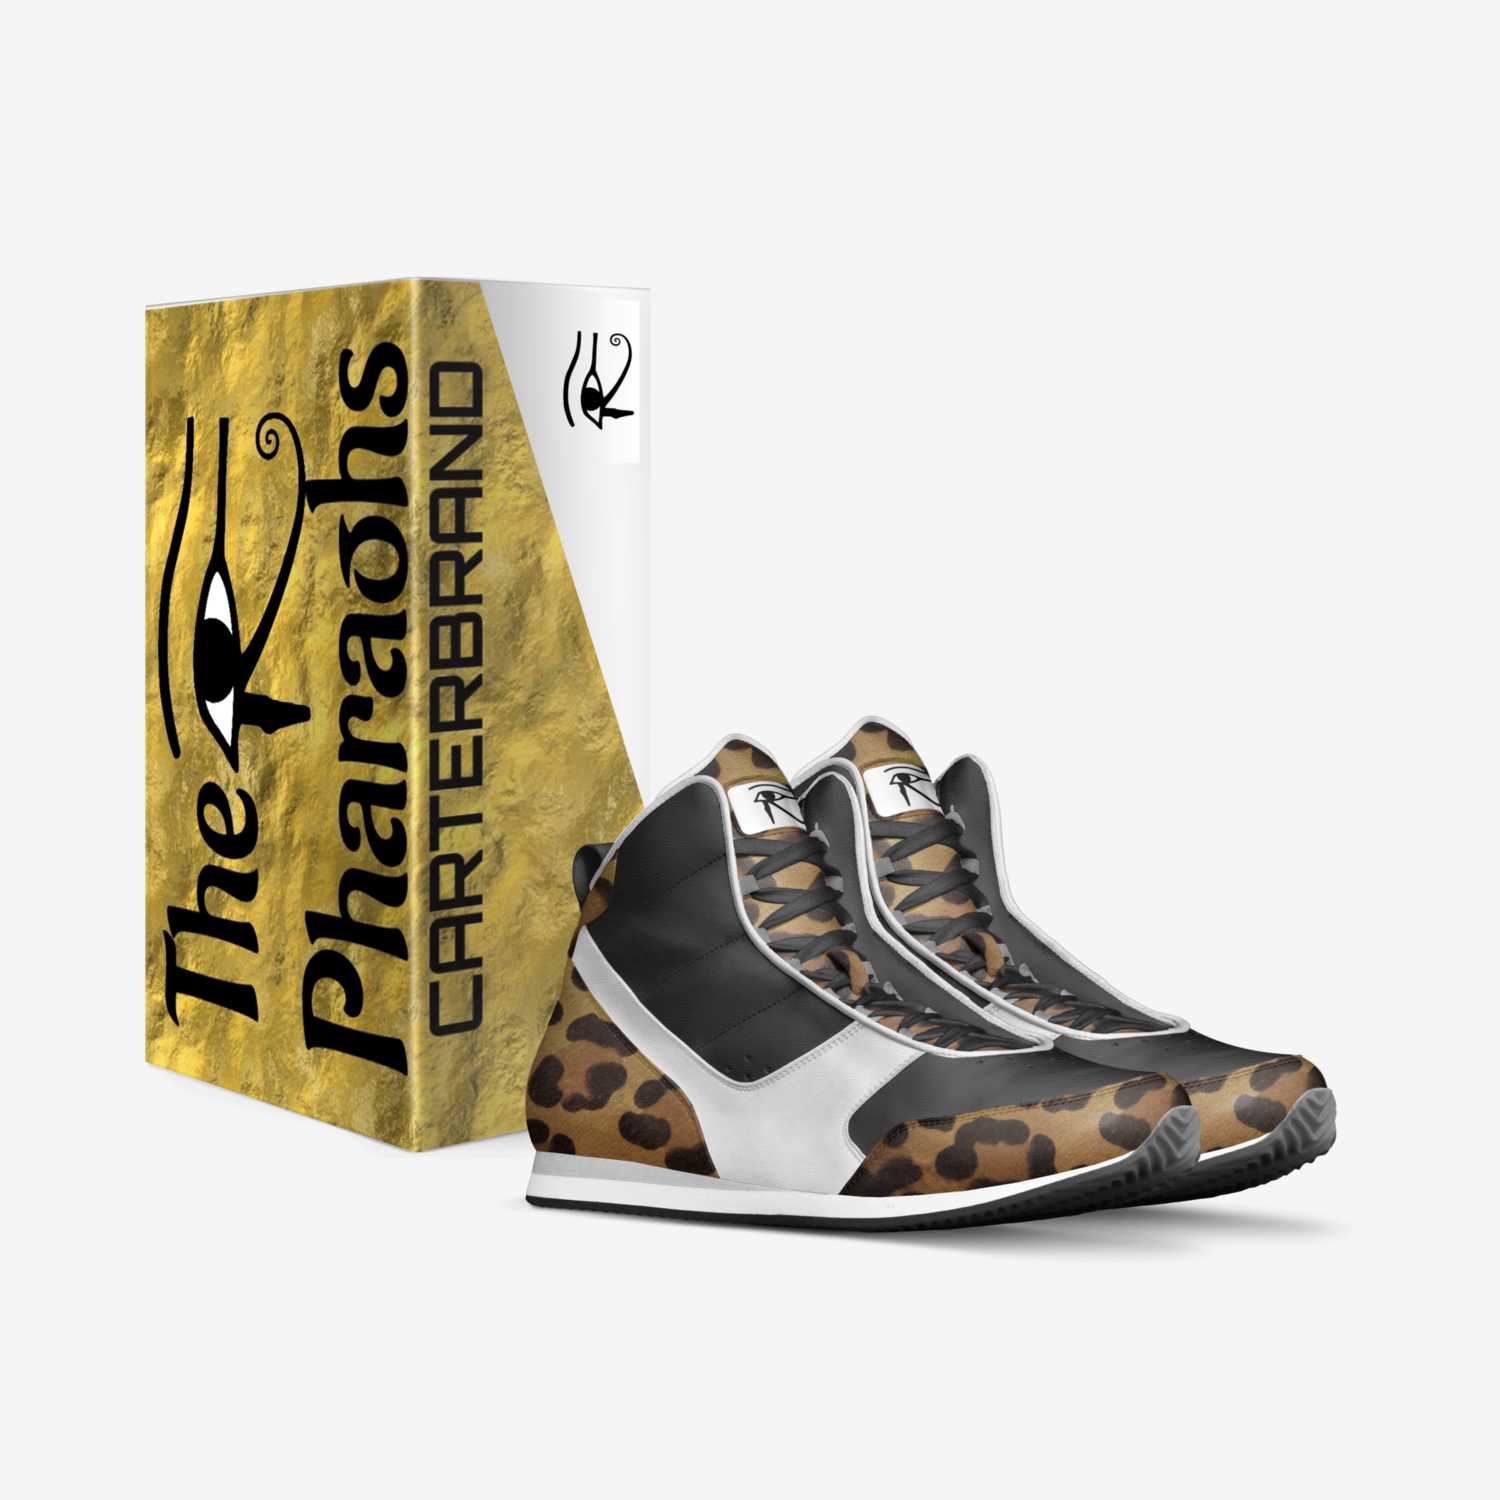 PHARAOH custom made in Italy shoes by Kat Carter | Box view